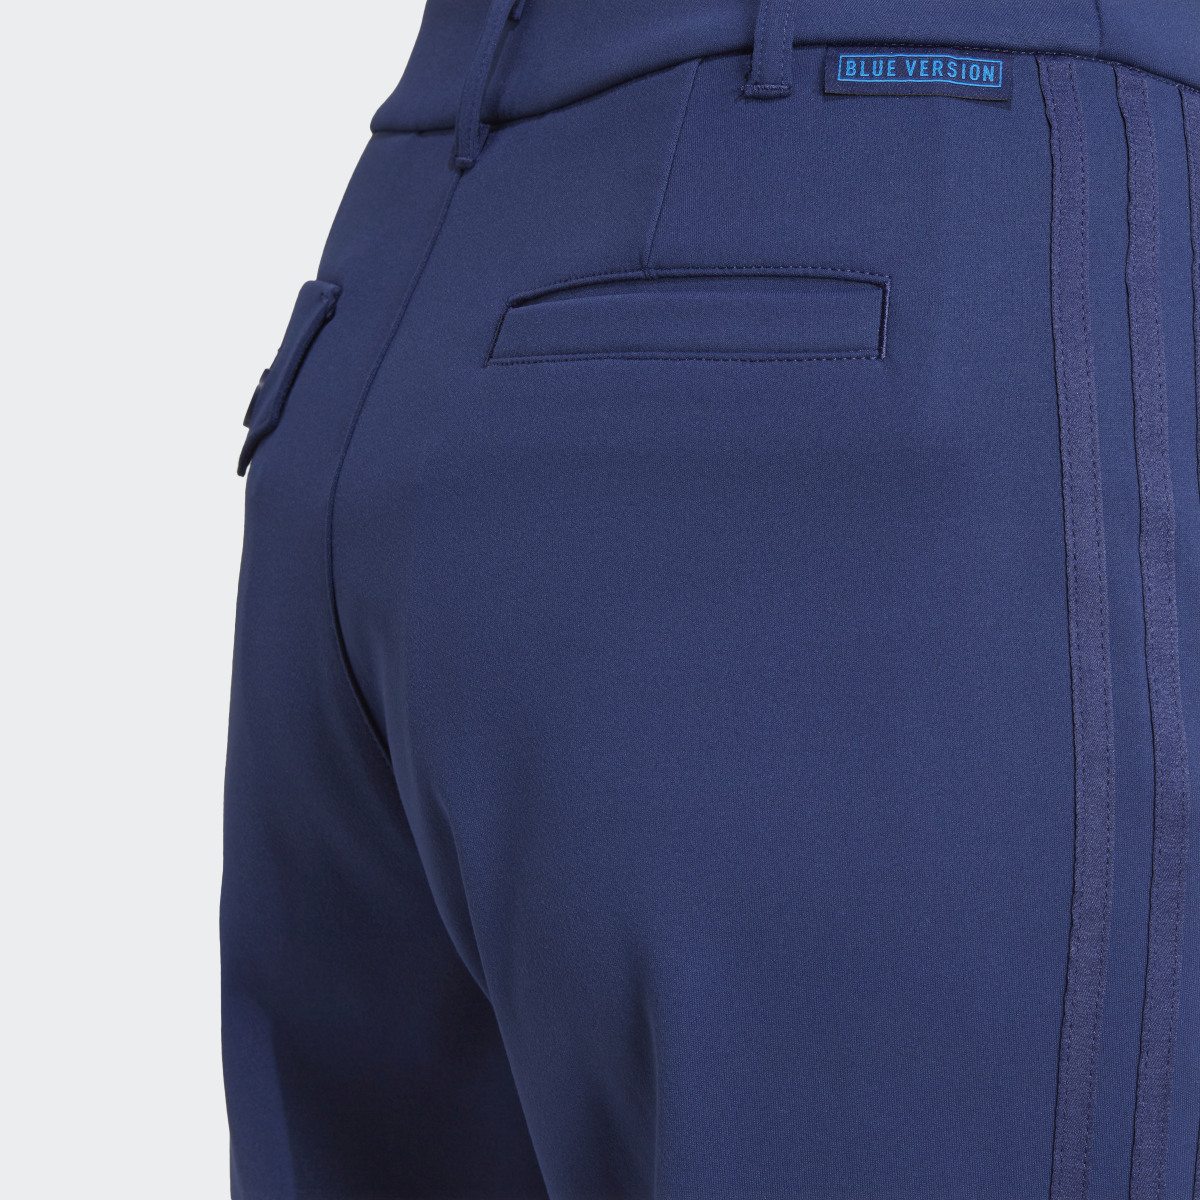 Adidas Blue Version Club High-Waisted Tracksuit Bottoms. 5